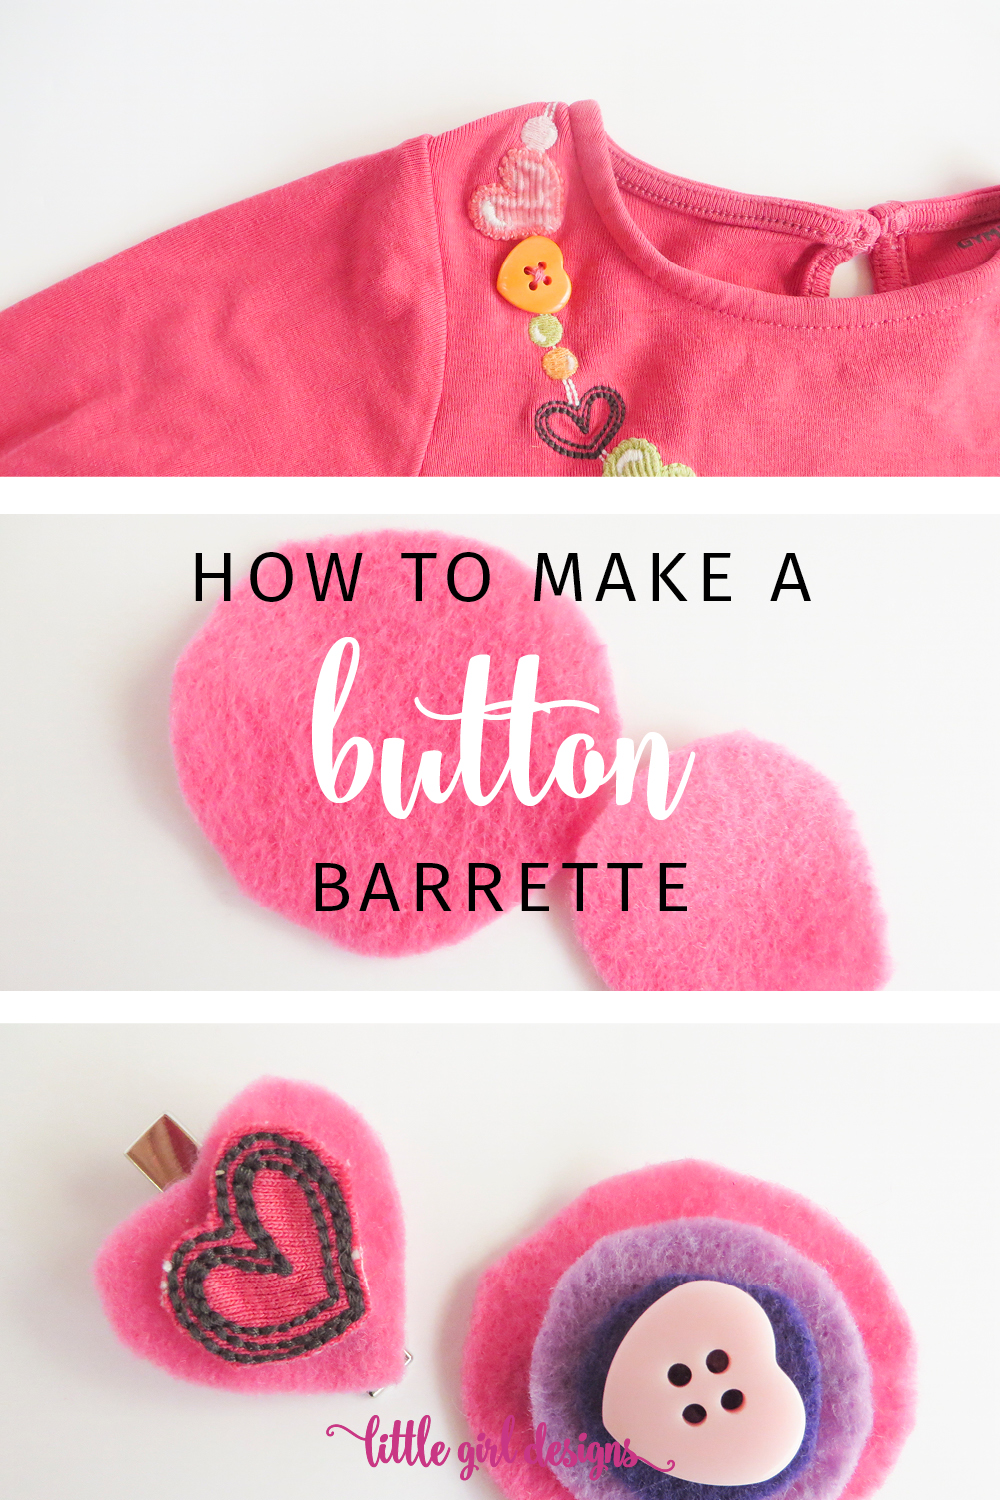 This upcycled button barrette is so simple to make! And it's cute and functional too! Make a bunch for your little girl. :)